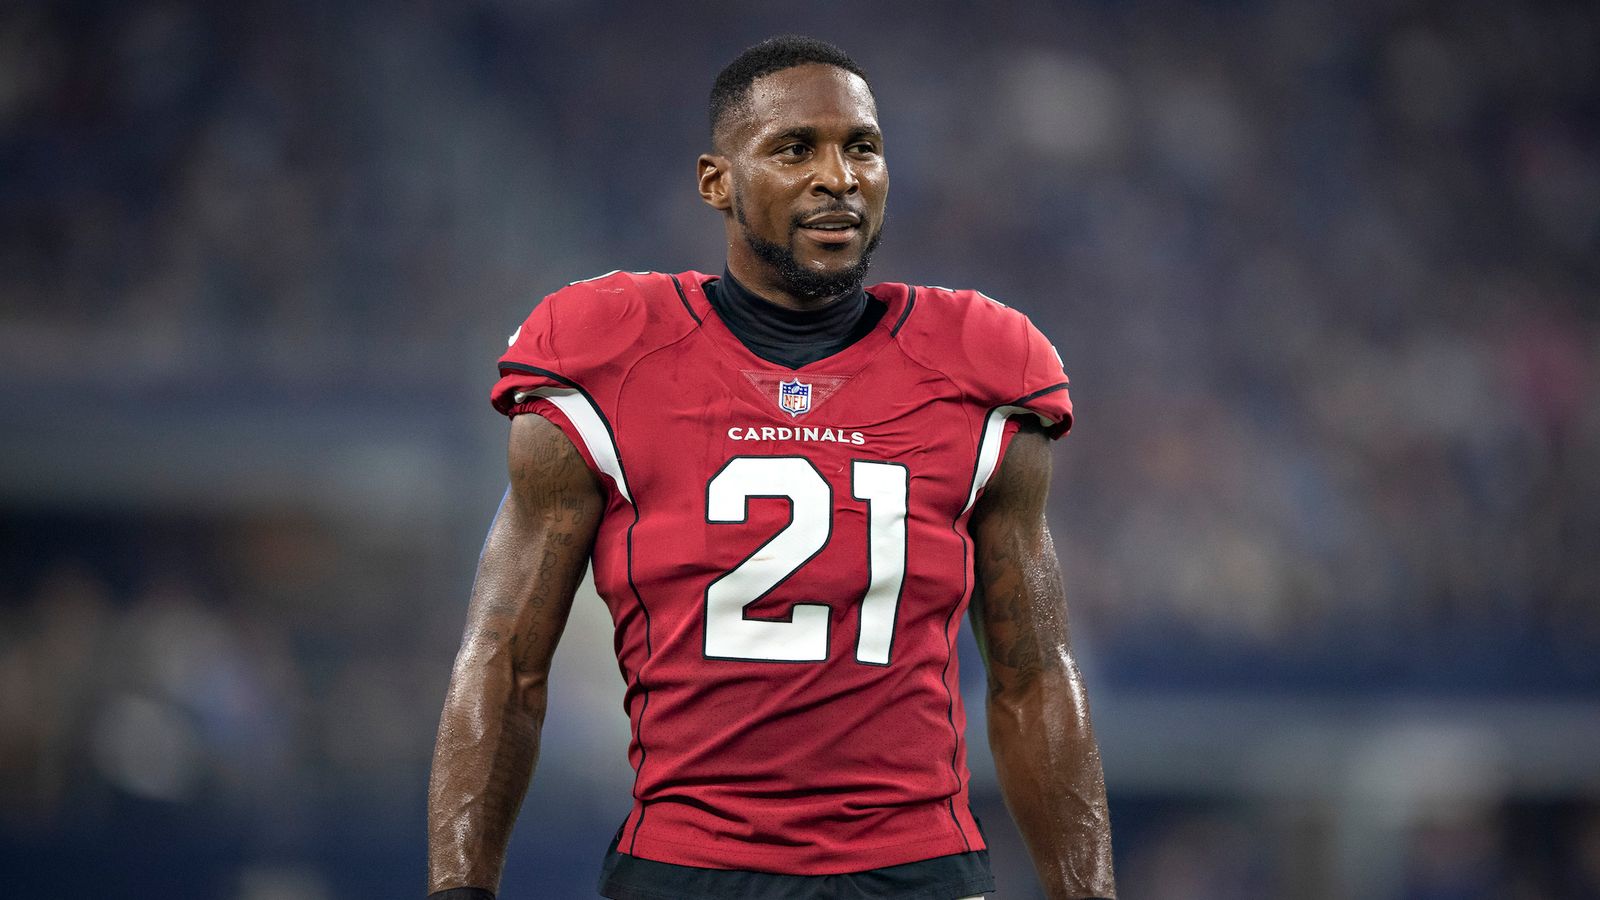 Trading Patrick Peterson 'out of the question,' Cardinals' Steve